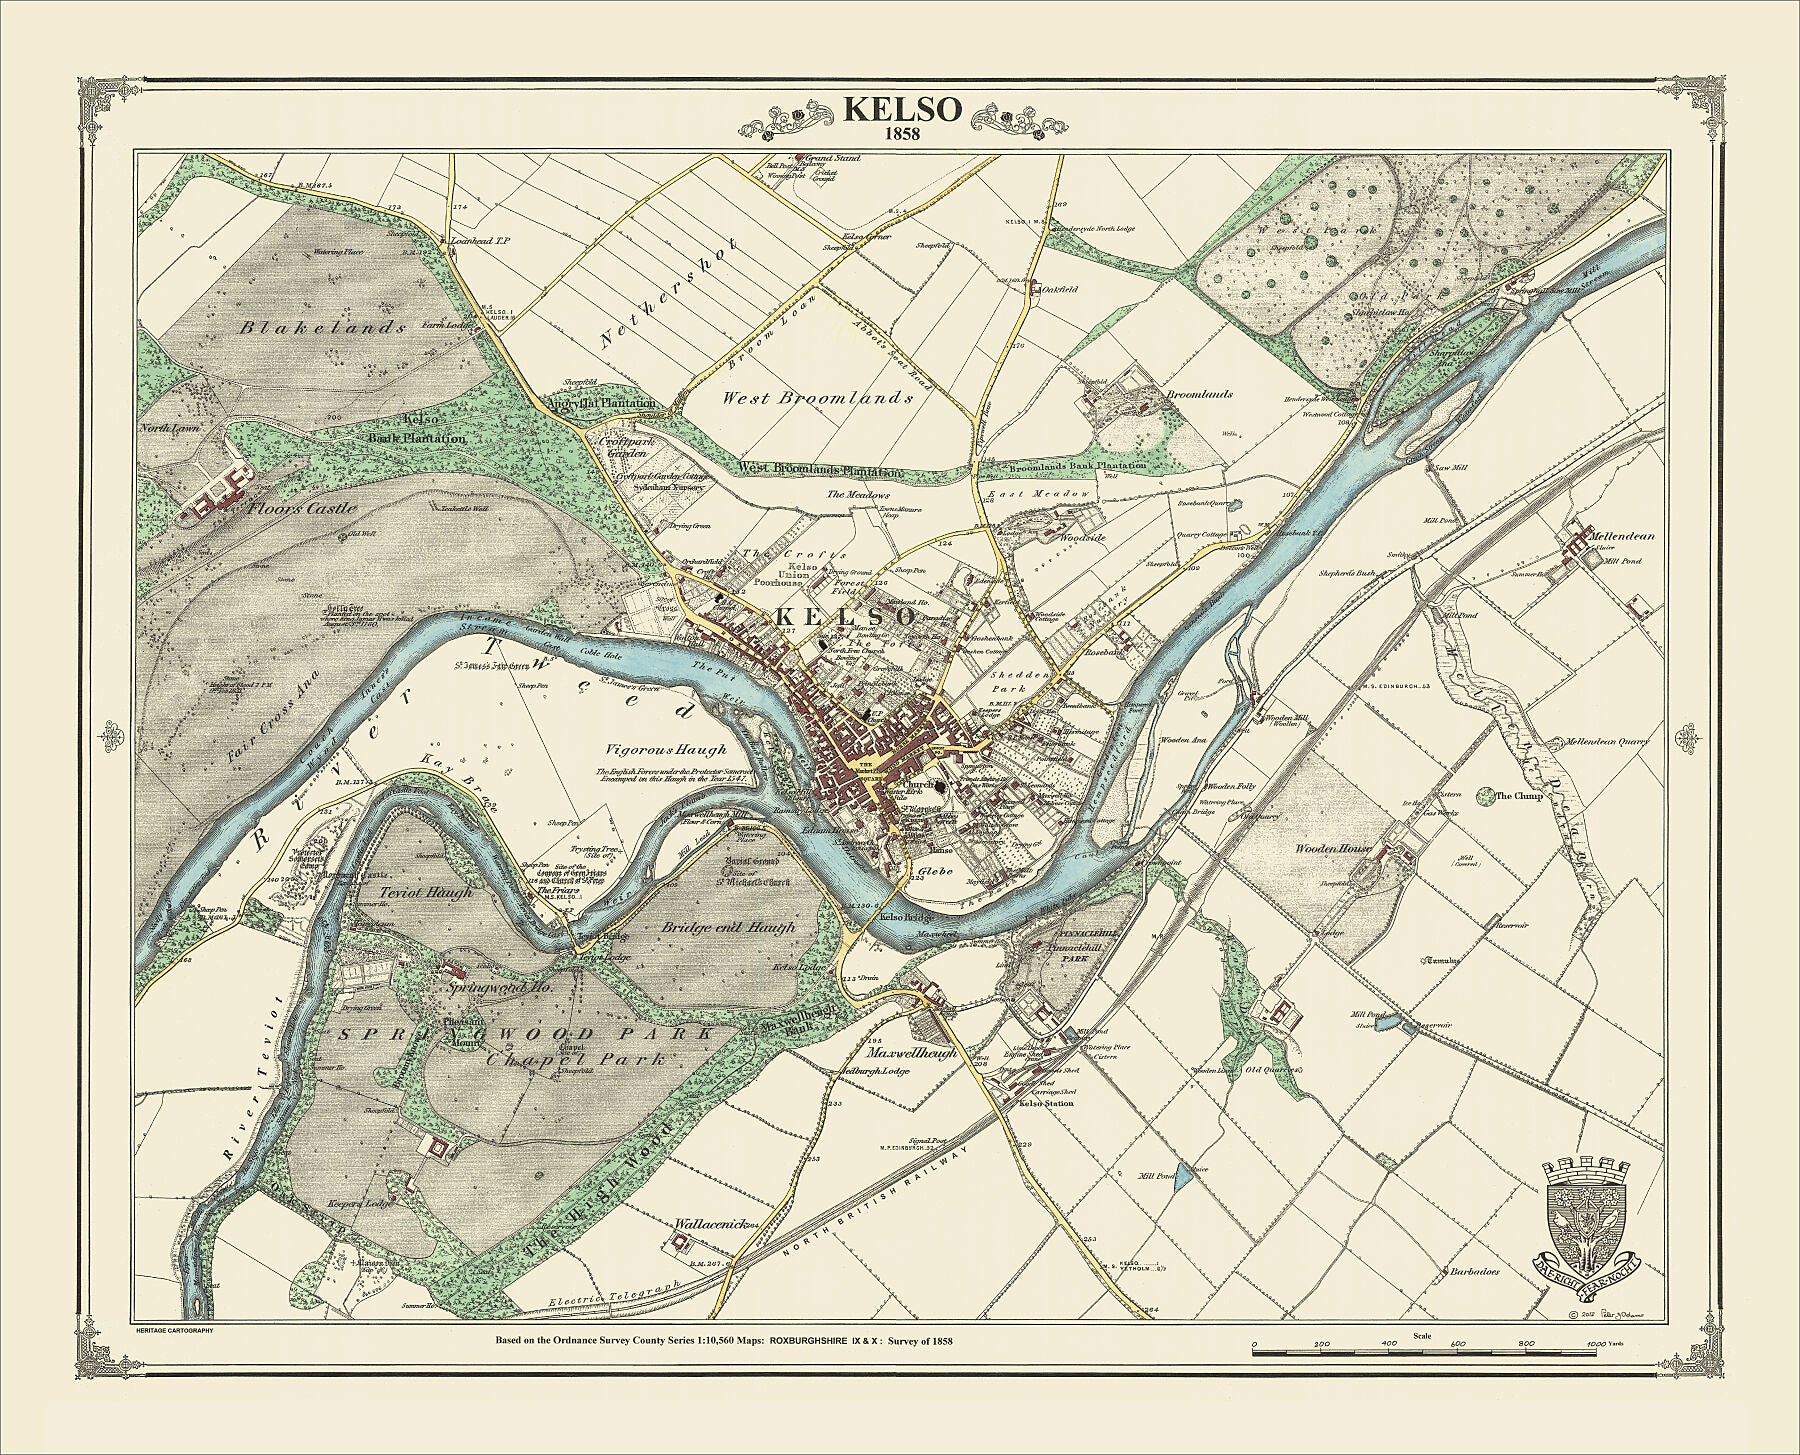 Coloured Victorian map of Kelso in 1858 by Peter J Adams of Heritage Cartography